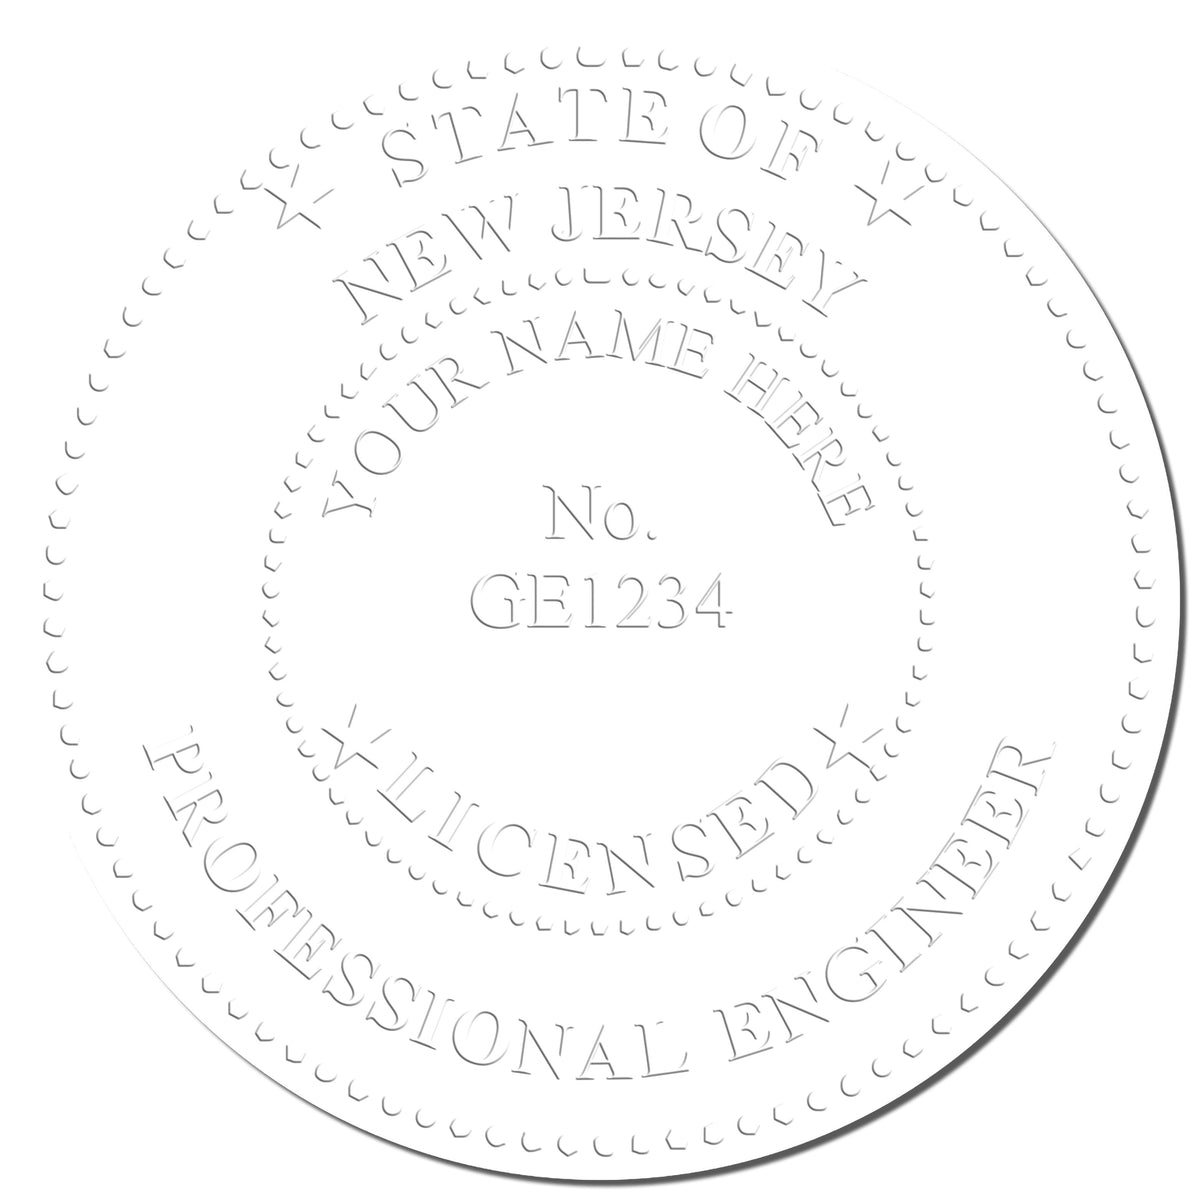 The Long Reach New Jersey PE Seal stamp impression comes to life with a crisp, detailed photo on paper - showcasing true professional quality.